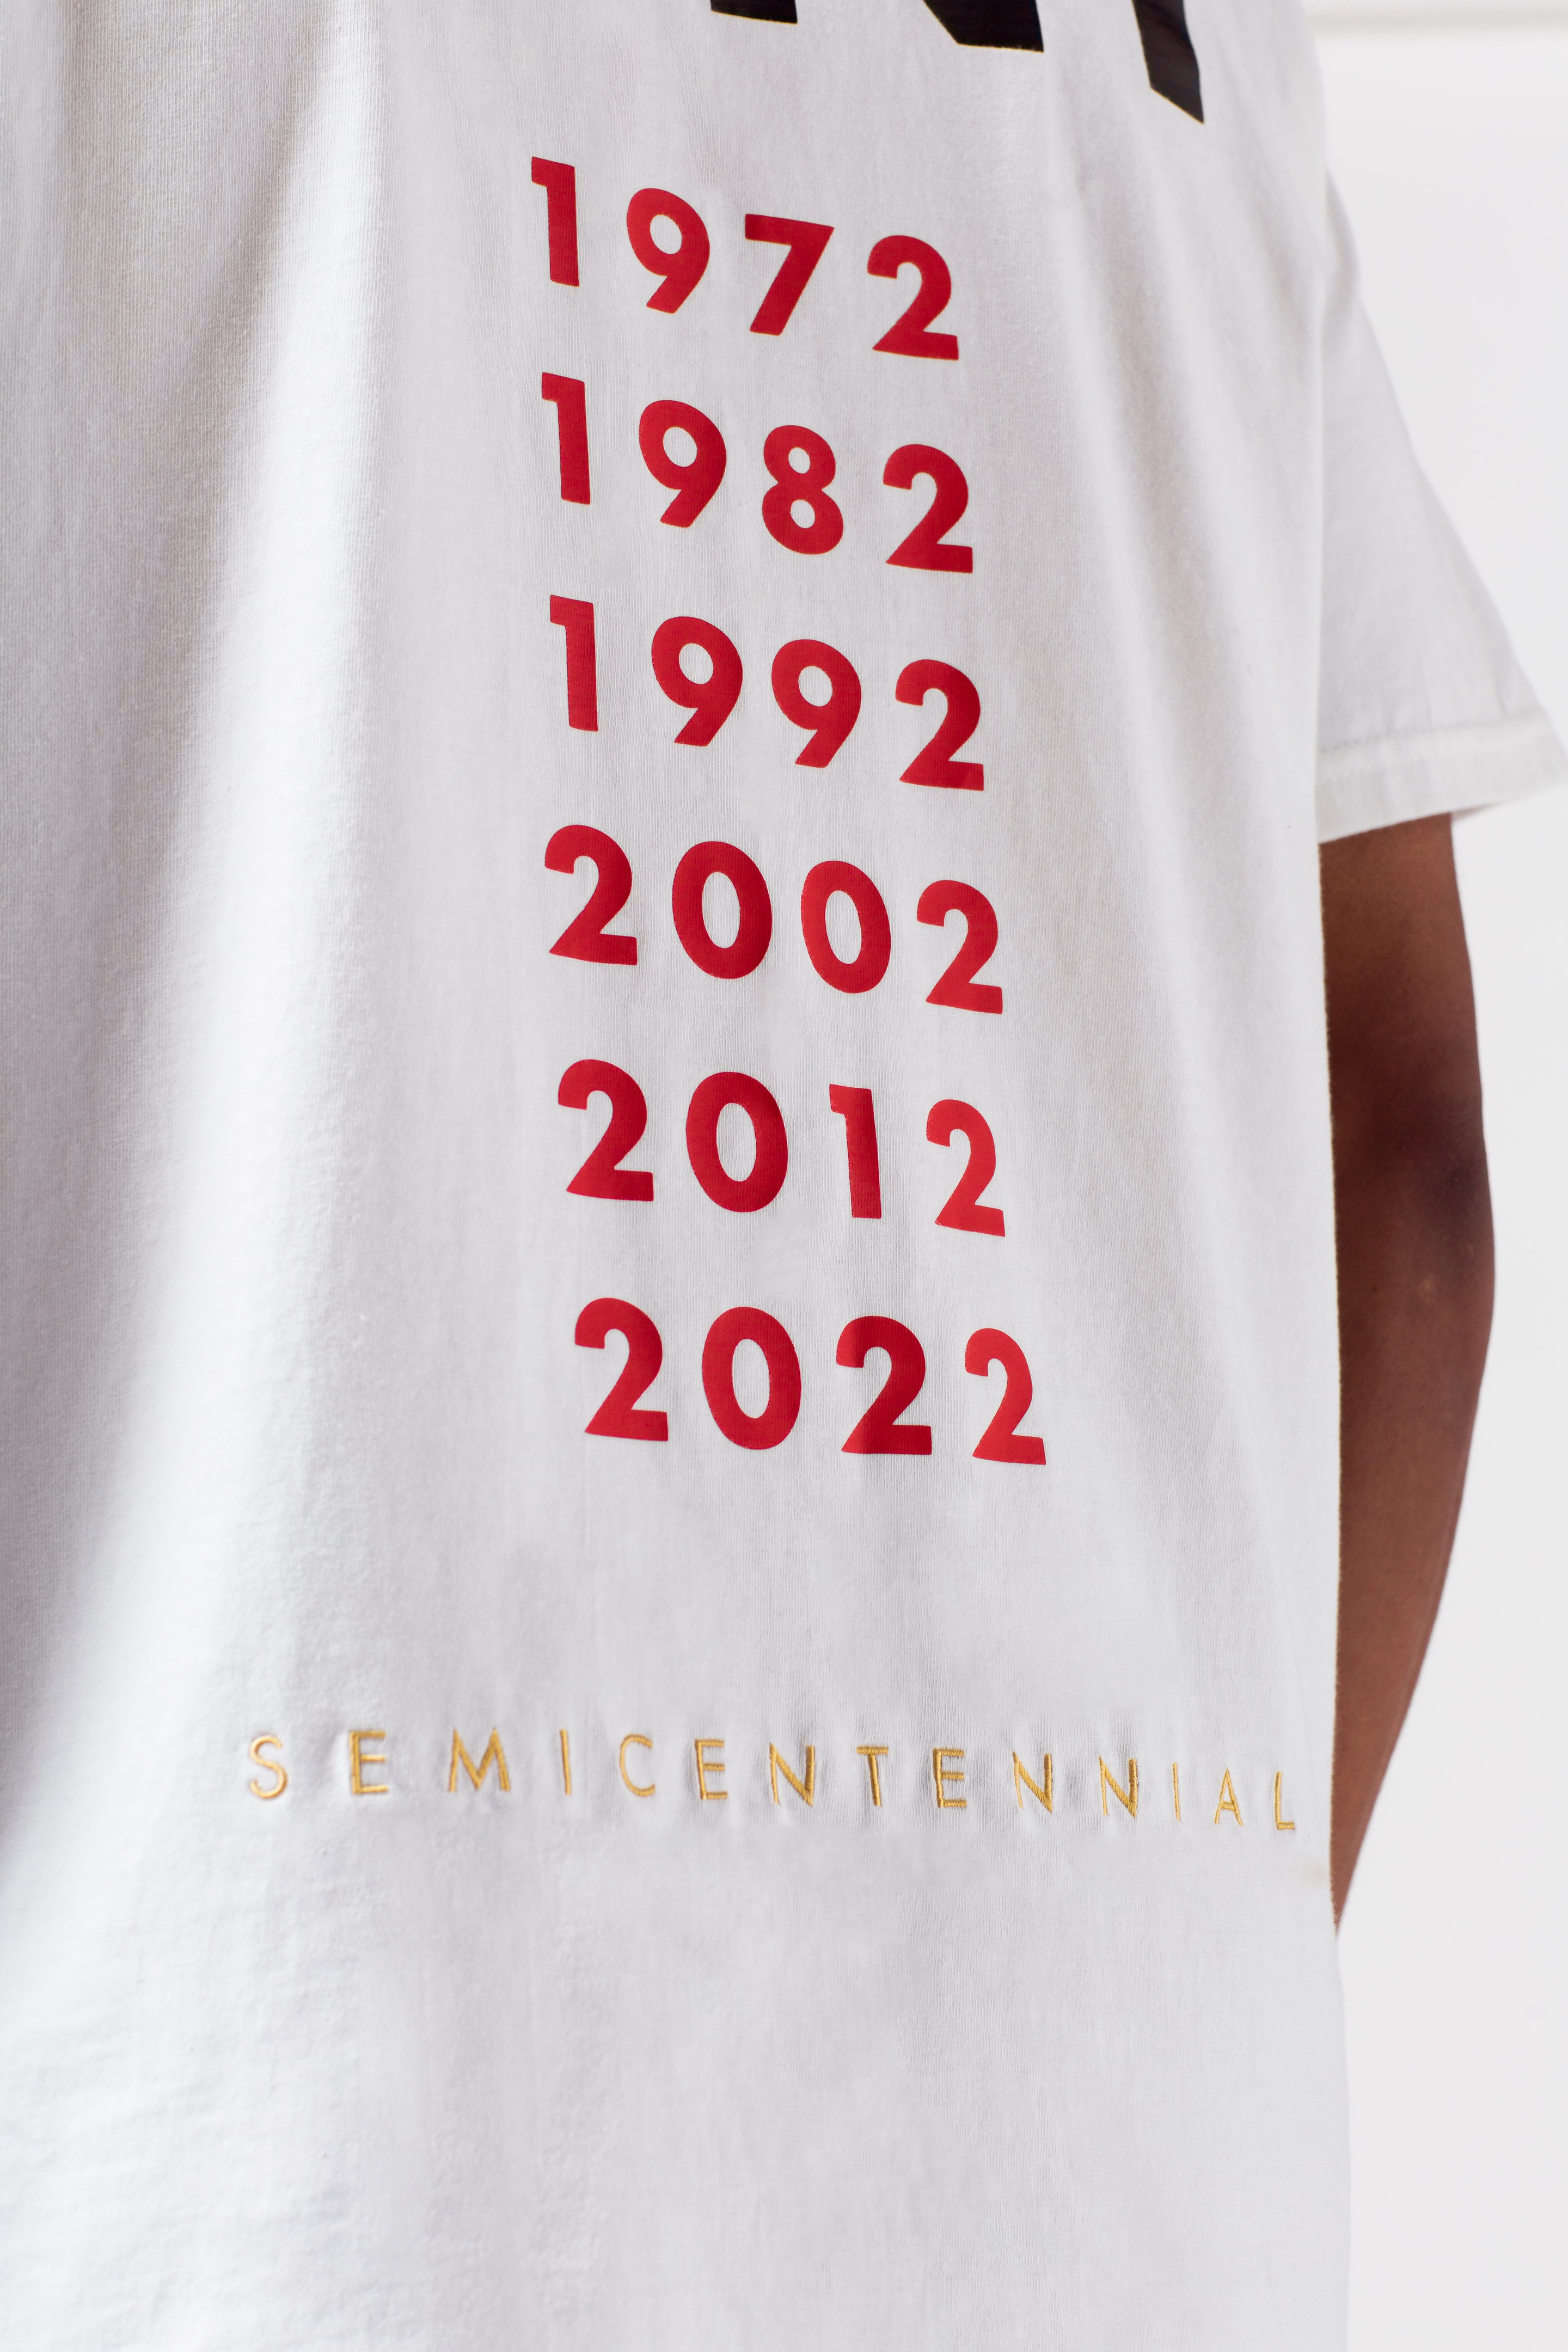 A close-up back shot of the white semi centennial sports tee featuring a PONY word mark across the top and years printed in red below, Yellow embroidered "SEMICENTENNIAL" across the bottom.